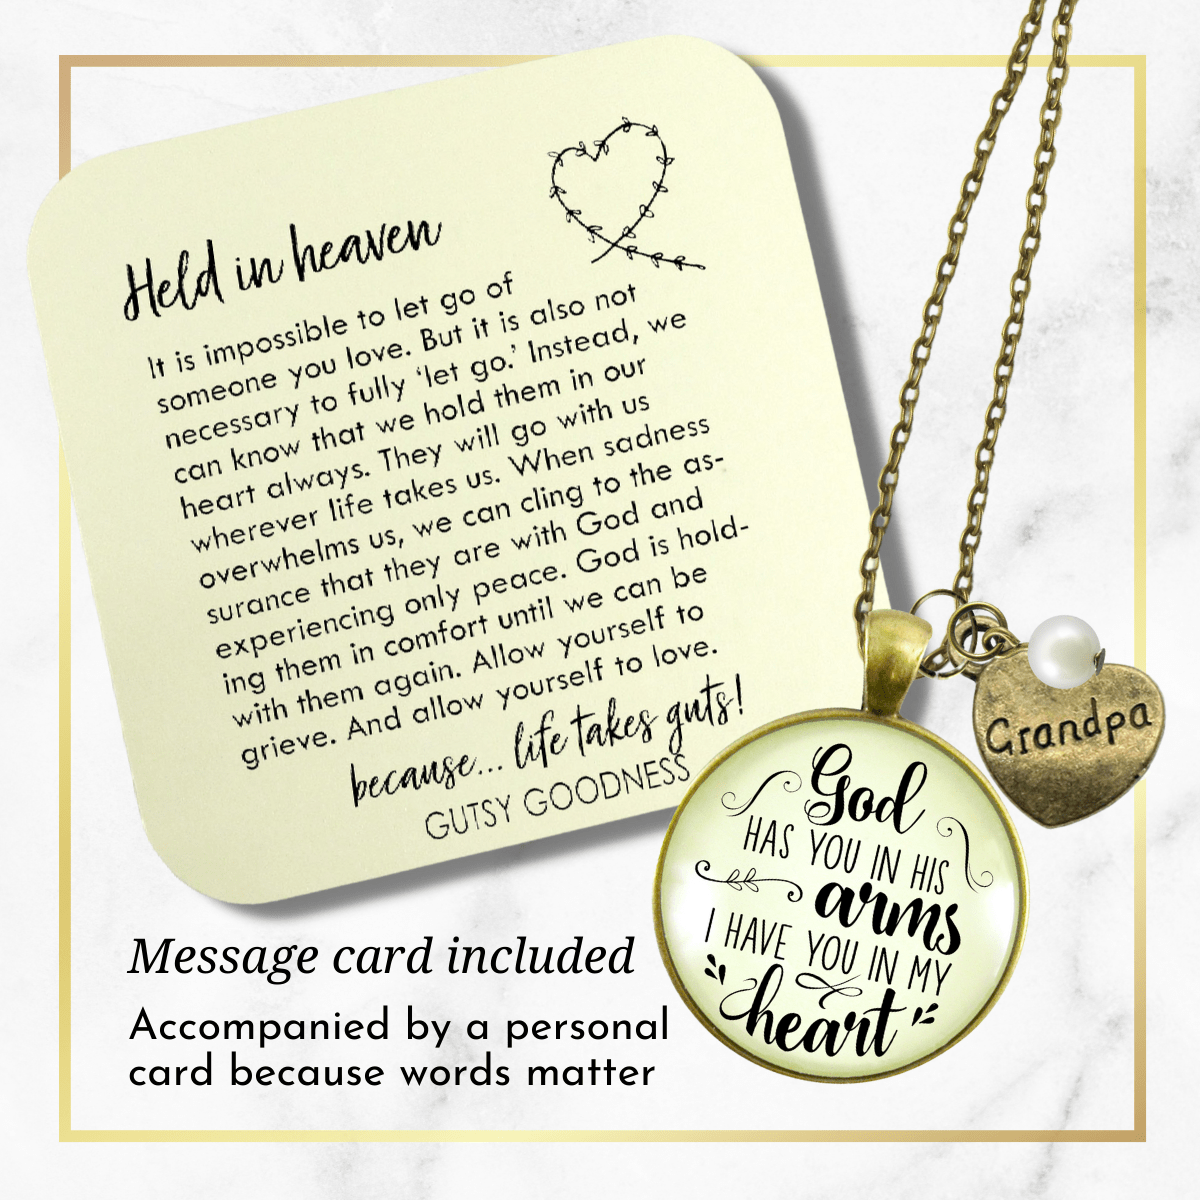 Gutsy Goodness Grandfather Memorial Necklace God Has You In His Arms Grandpa Heart Charm - Gutsy Goodness;Grandfather Memorial Necklace God Has You In His Arms Grandpa Heart Charm - Gutsy Goodness Handmade Jewelry Gifts